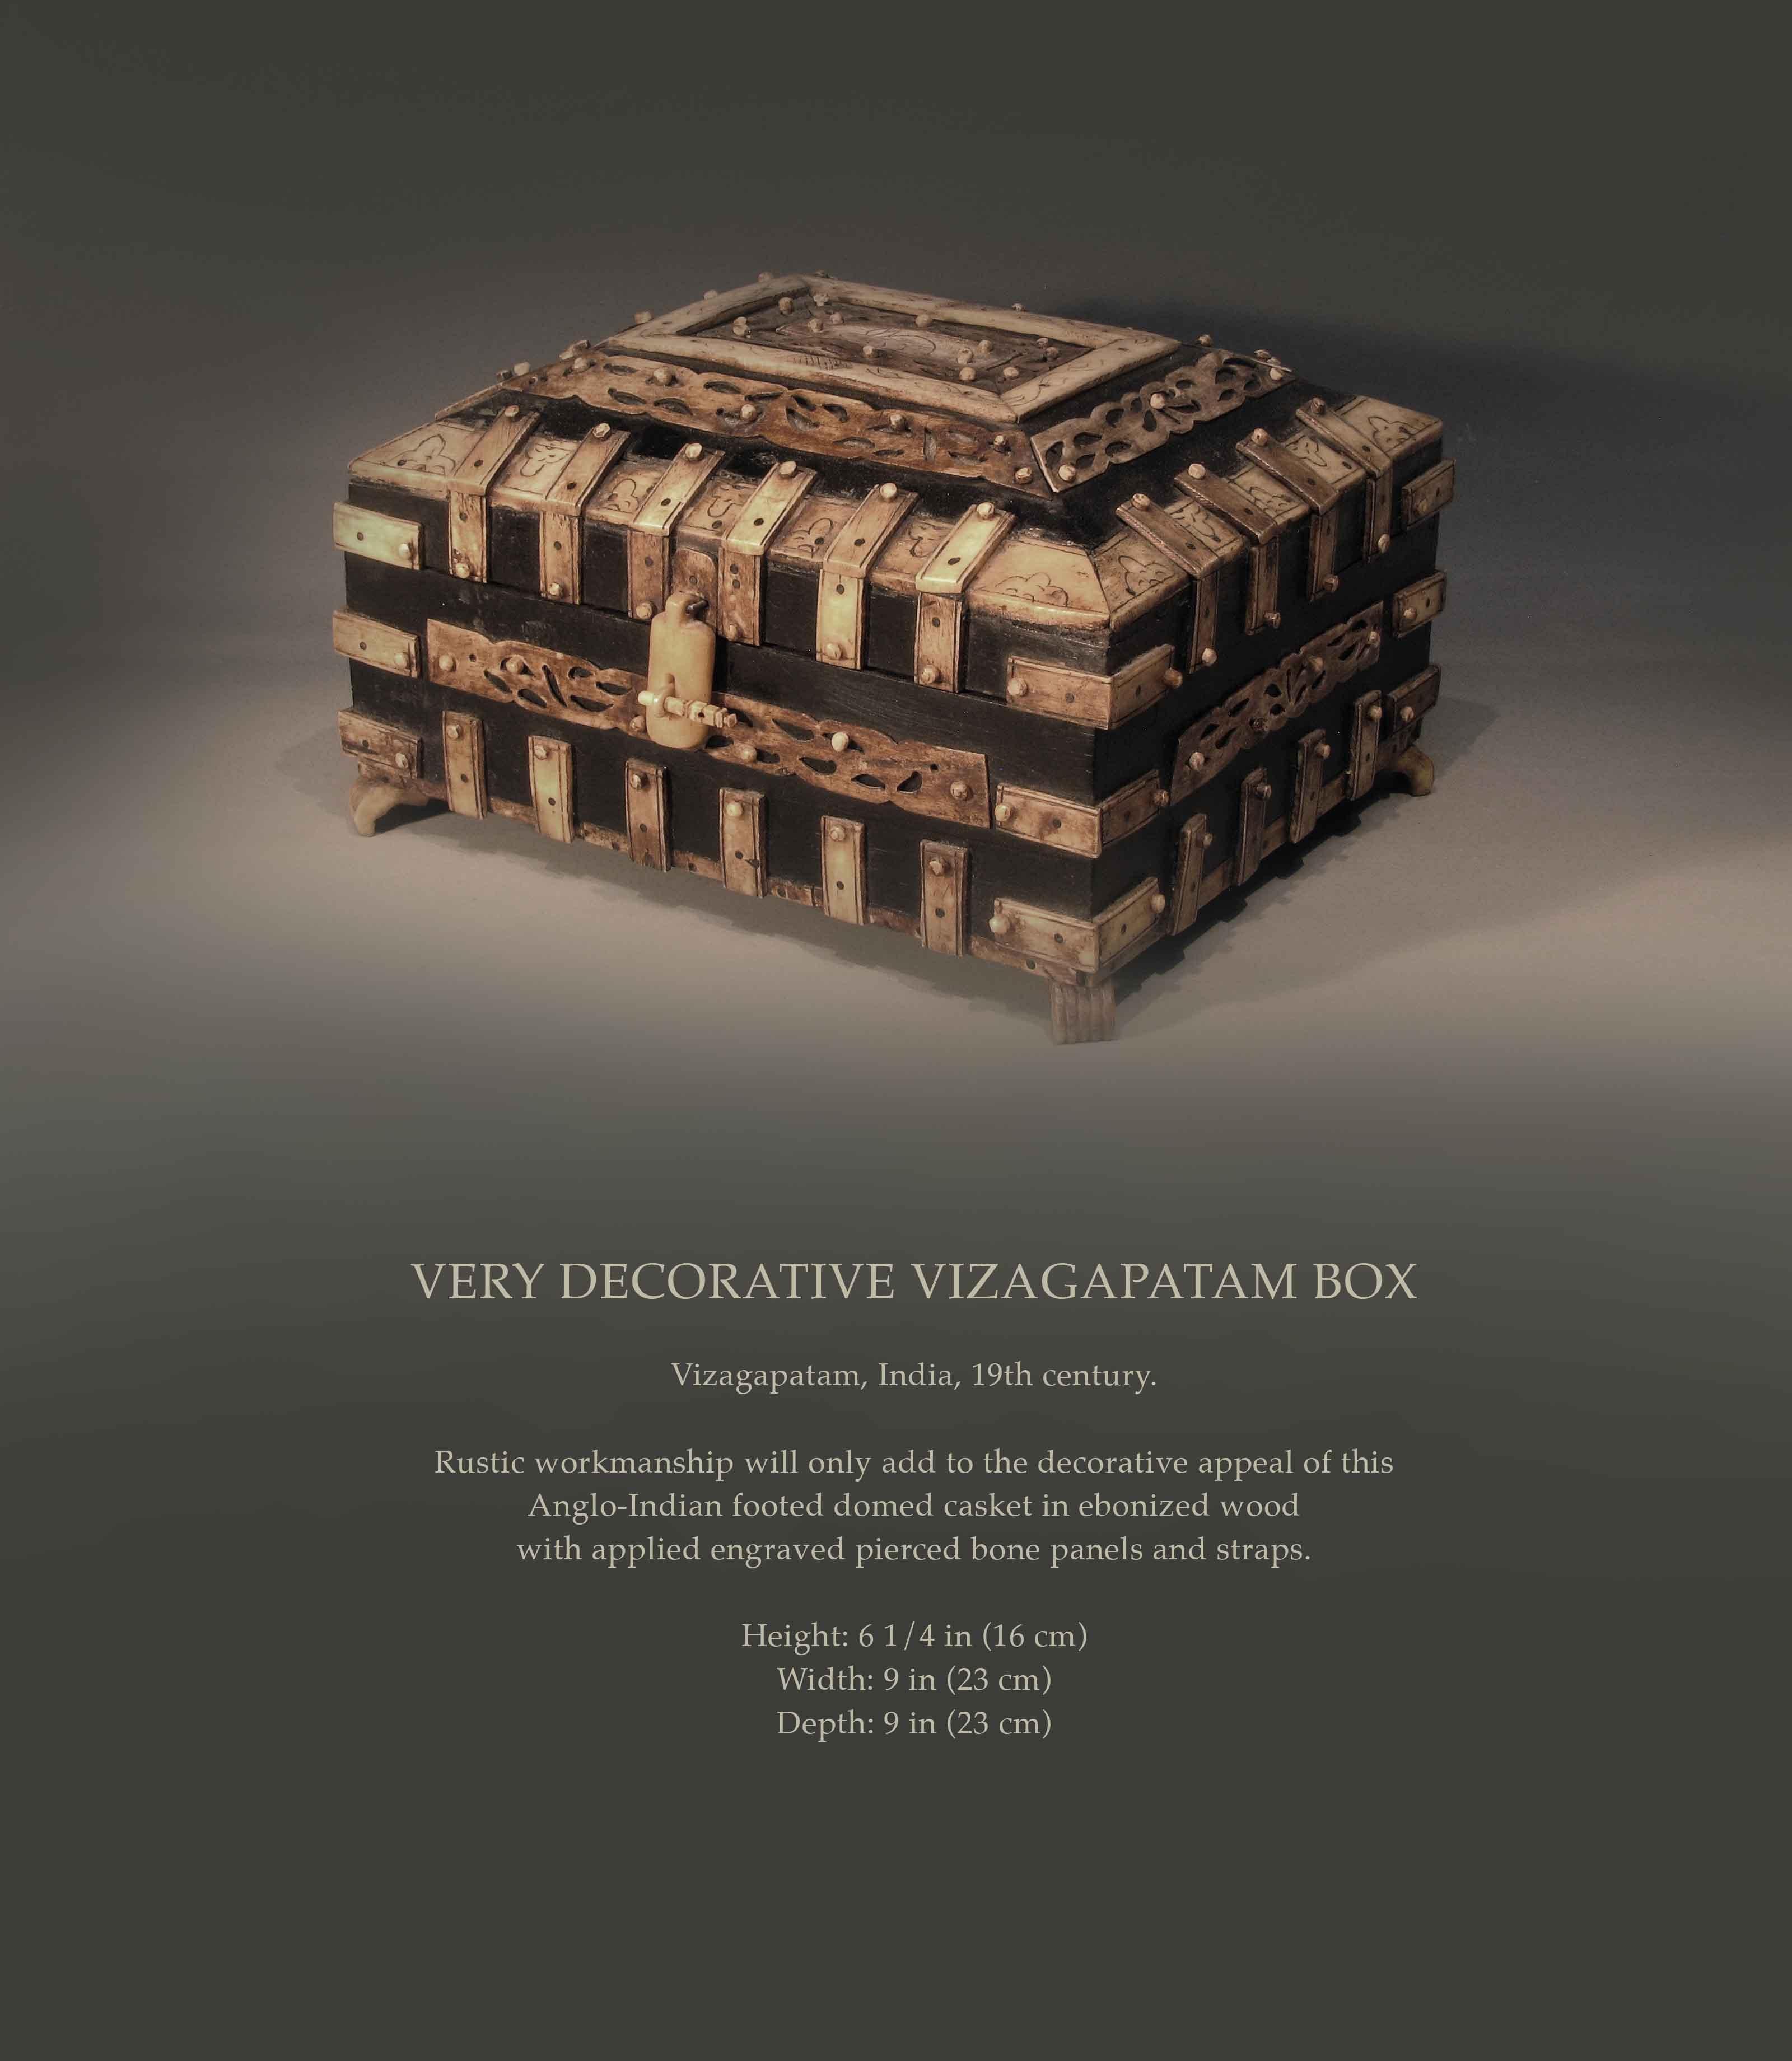 VERY DECORATIVE VIZAGAPATAM BOX

Vizagapatam, India, 19th Century.

Rustic workmanship will only add to the decorative appeal of this Anglo-Indian footed domed casket in ebonized wood with applied engraved pierced bone panels and straps.

Height: 6